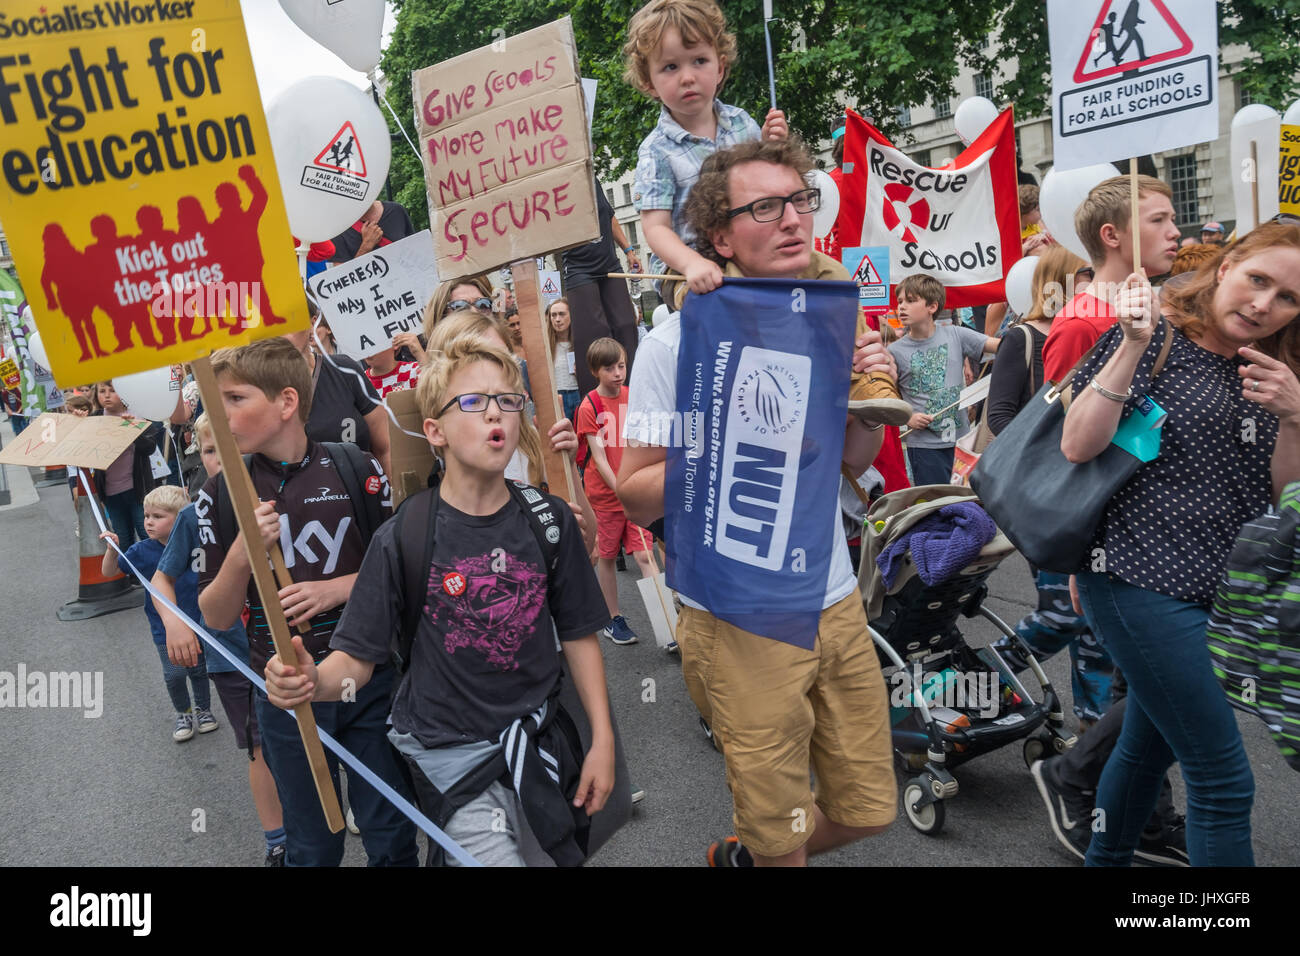 London, UK. 16th July 2017. Many of the hundreds of parents, children, teachers and others marching from Embankment to Parliament Square in a protest against unfair cuts in school funding shouted loudly as they passed Downing St. The 'Carnival Against Cuts' was organised by parents in the 'Fair Funding for All Schools' campaign and supported by the NUT.  arly in the inner cities Credit: Peter Marshall/Alamy Live News Stock Photo